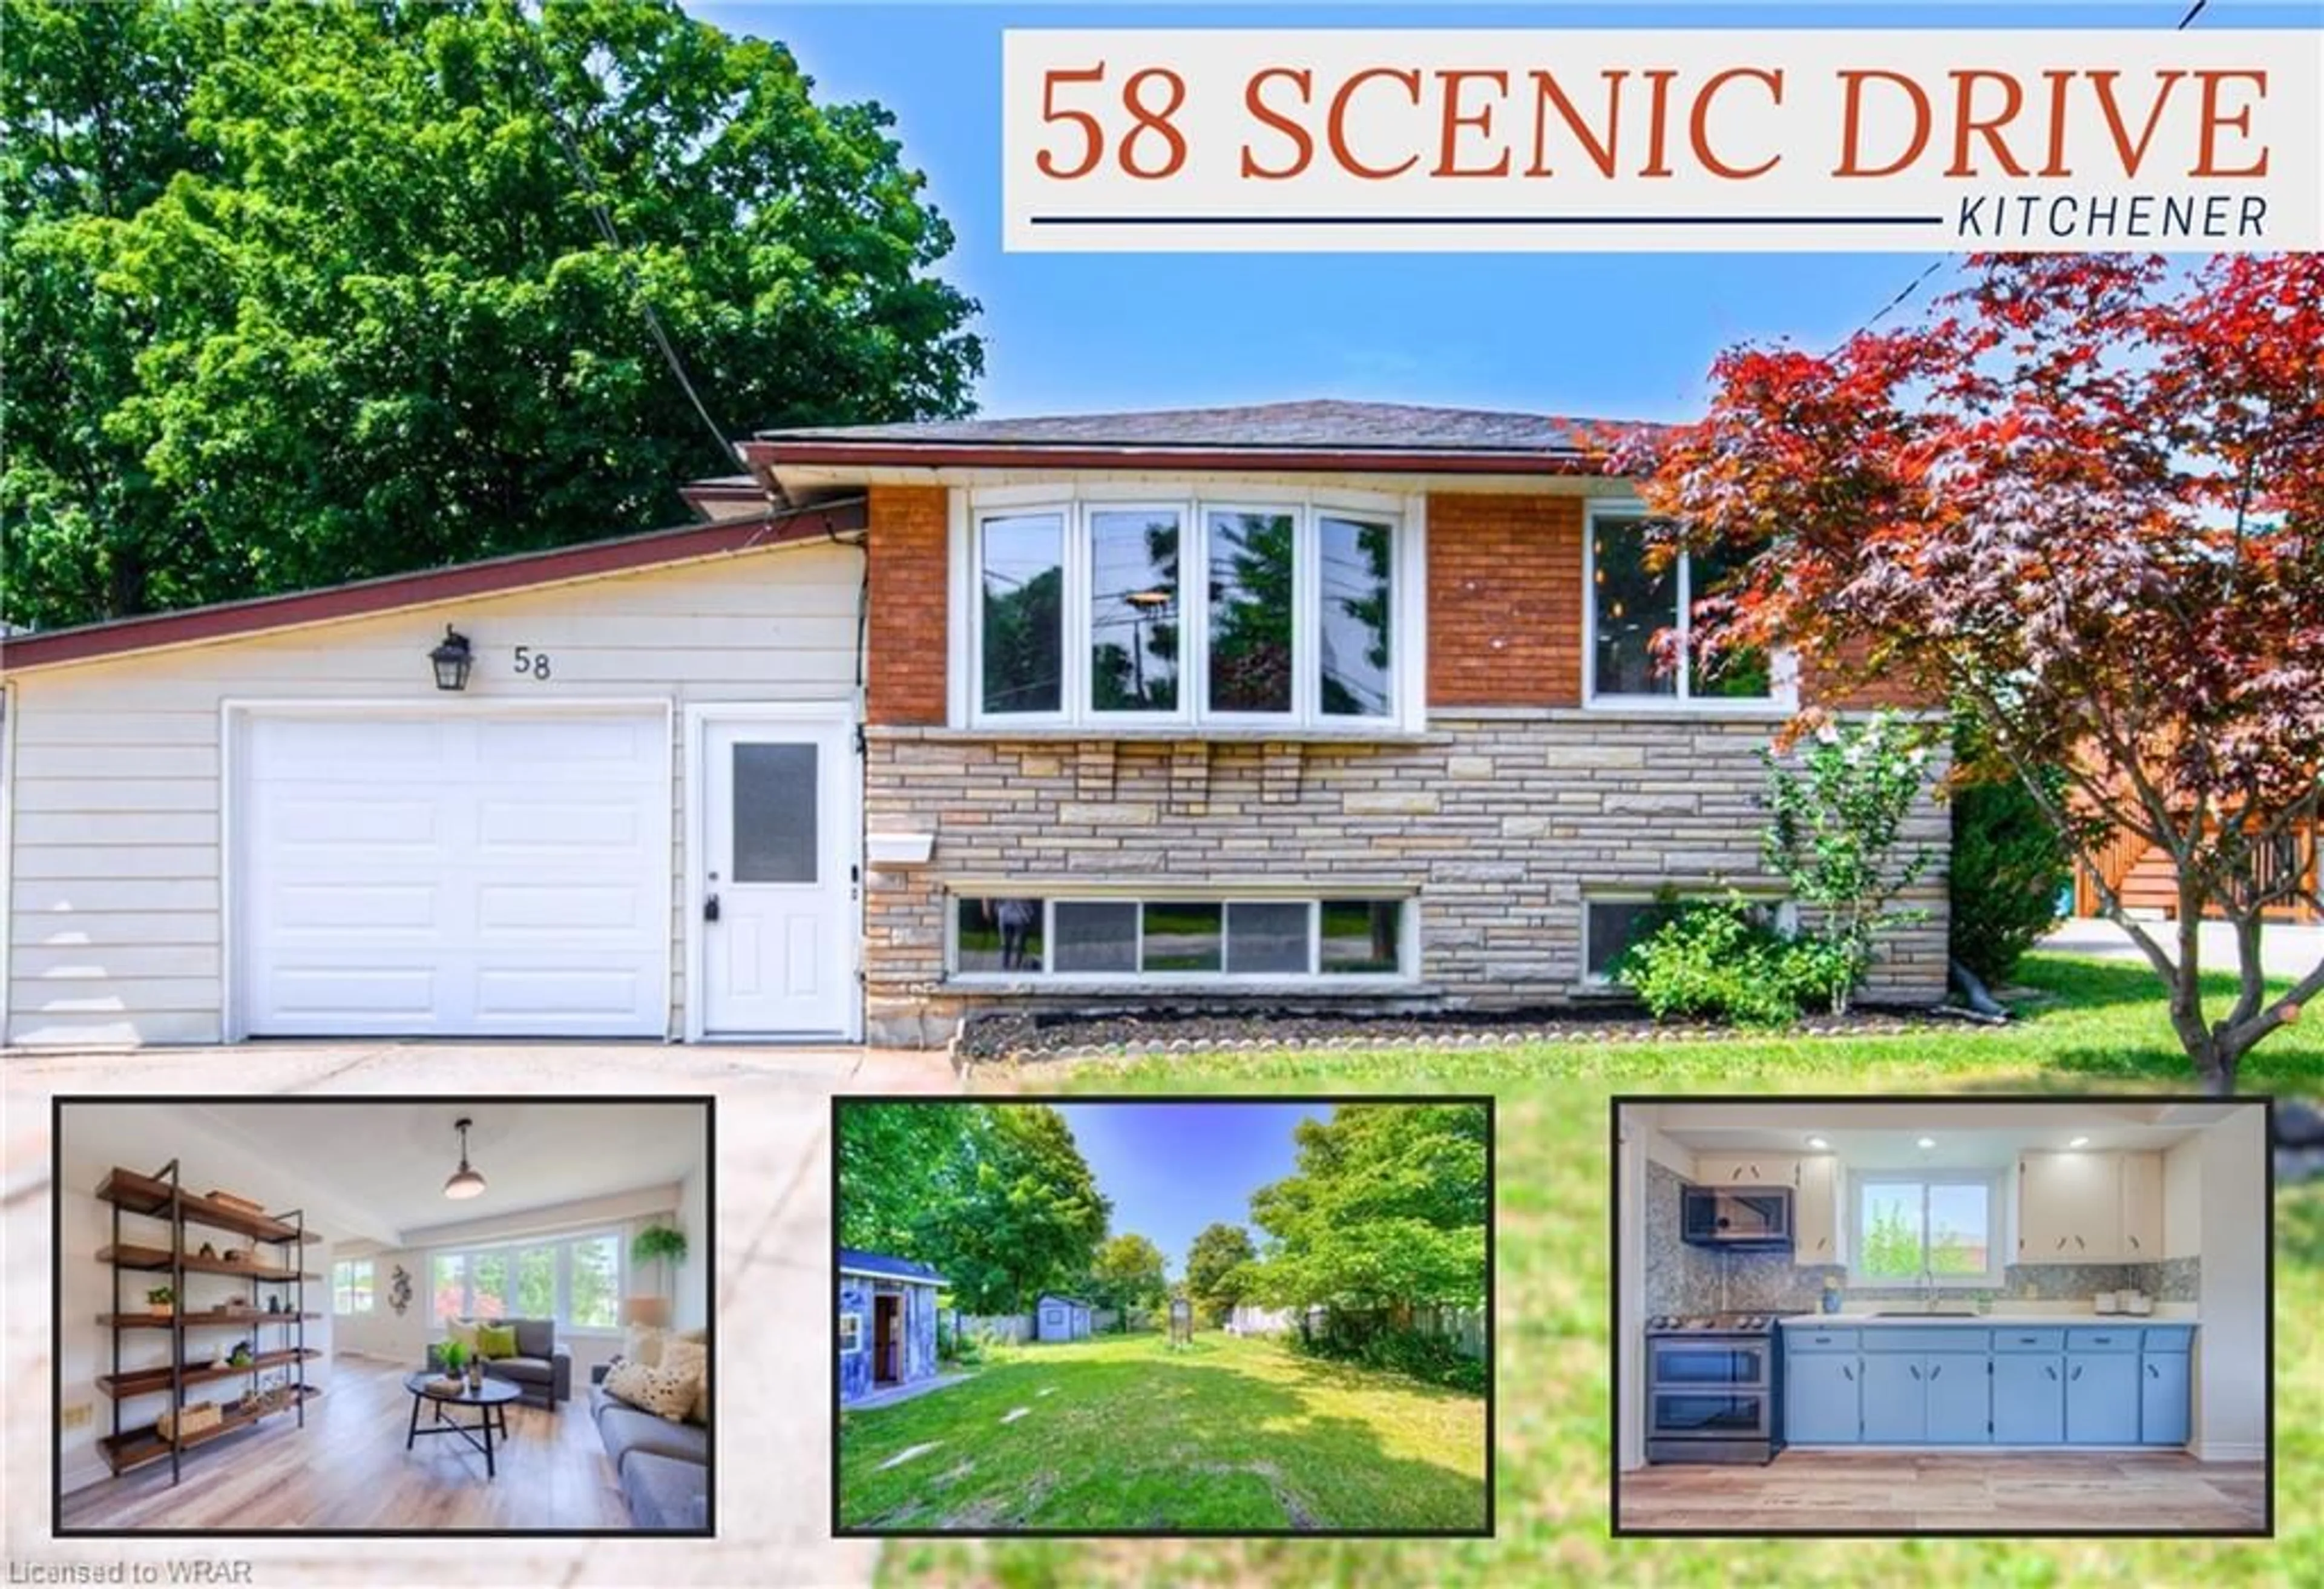 Frontside or backside of a home for 58 Scenic Dr, Kitchener Ontario N2A 2P6